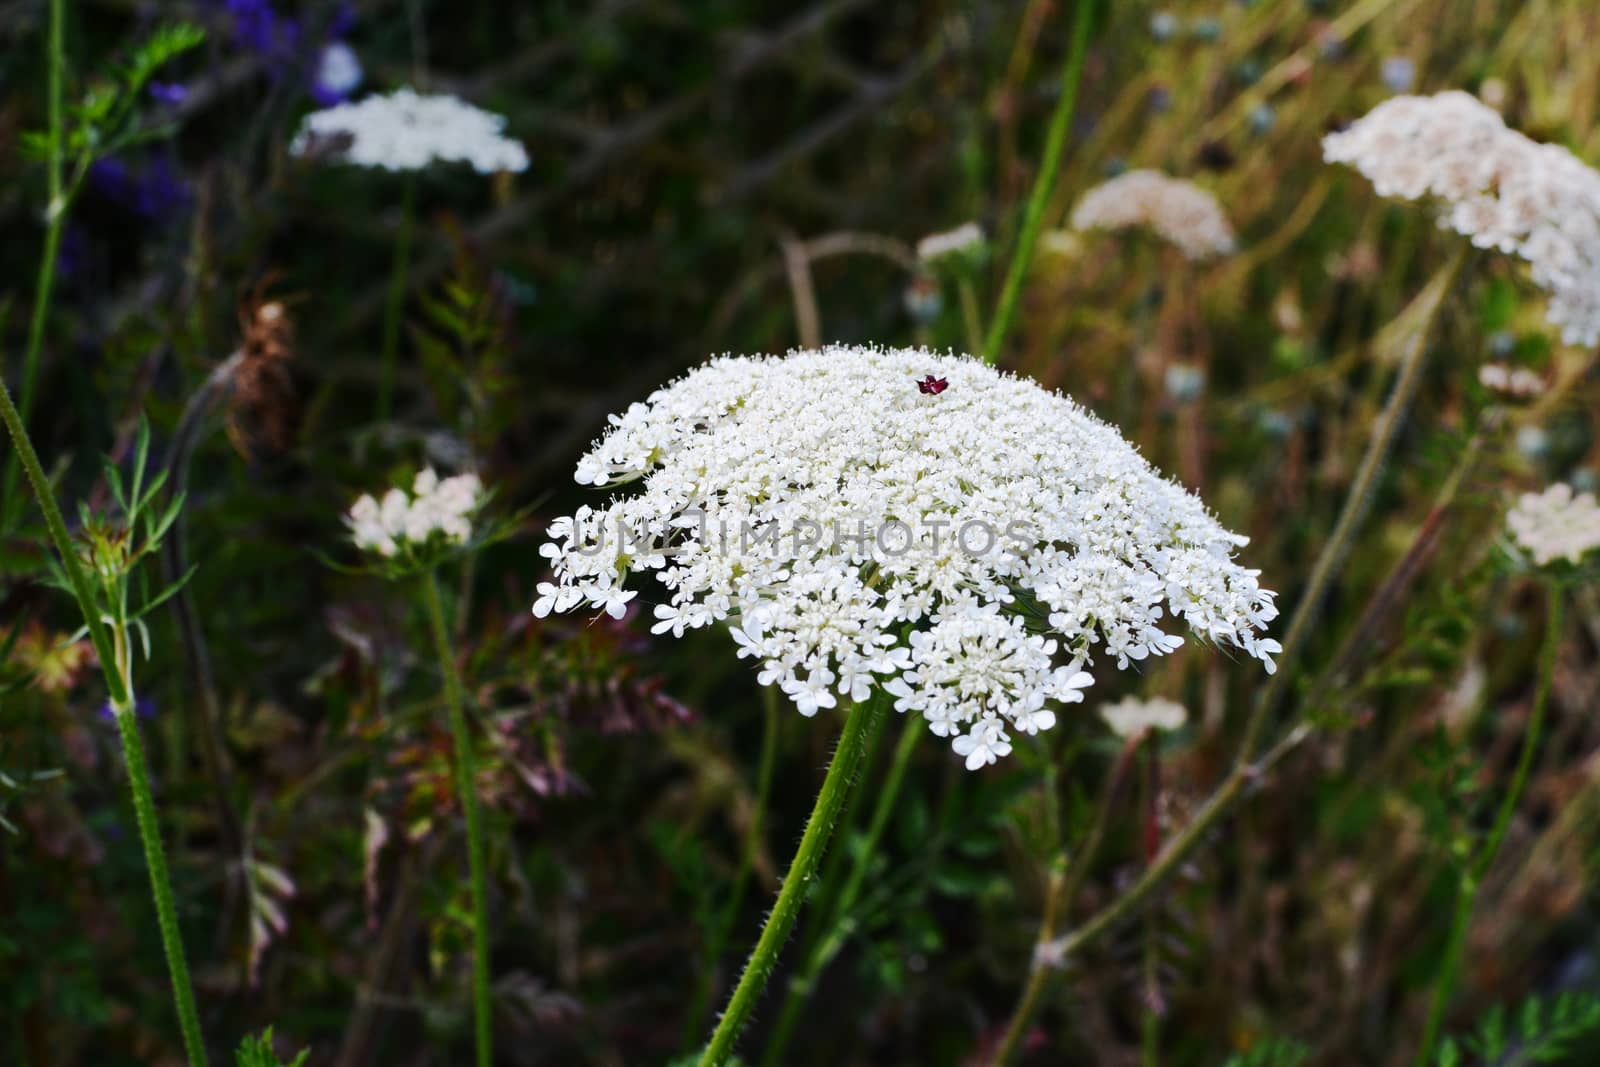 Cow parsley, or wild chervil - umbel cluster of delicate small white flowers, growing wild as a weed in a flower garden - Anthriscus sylvestris